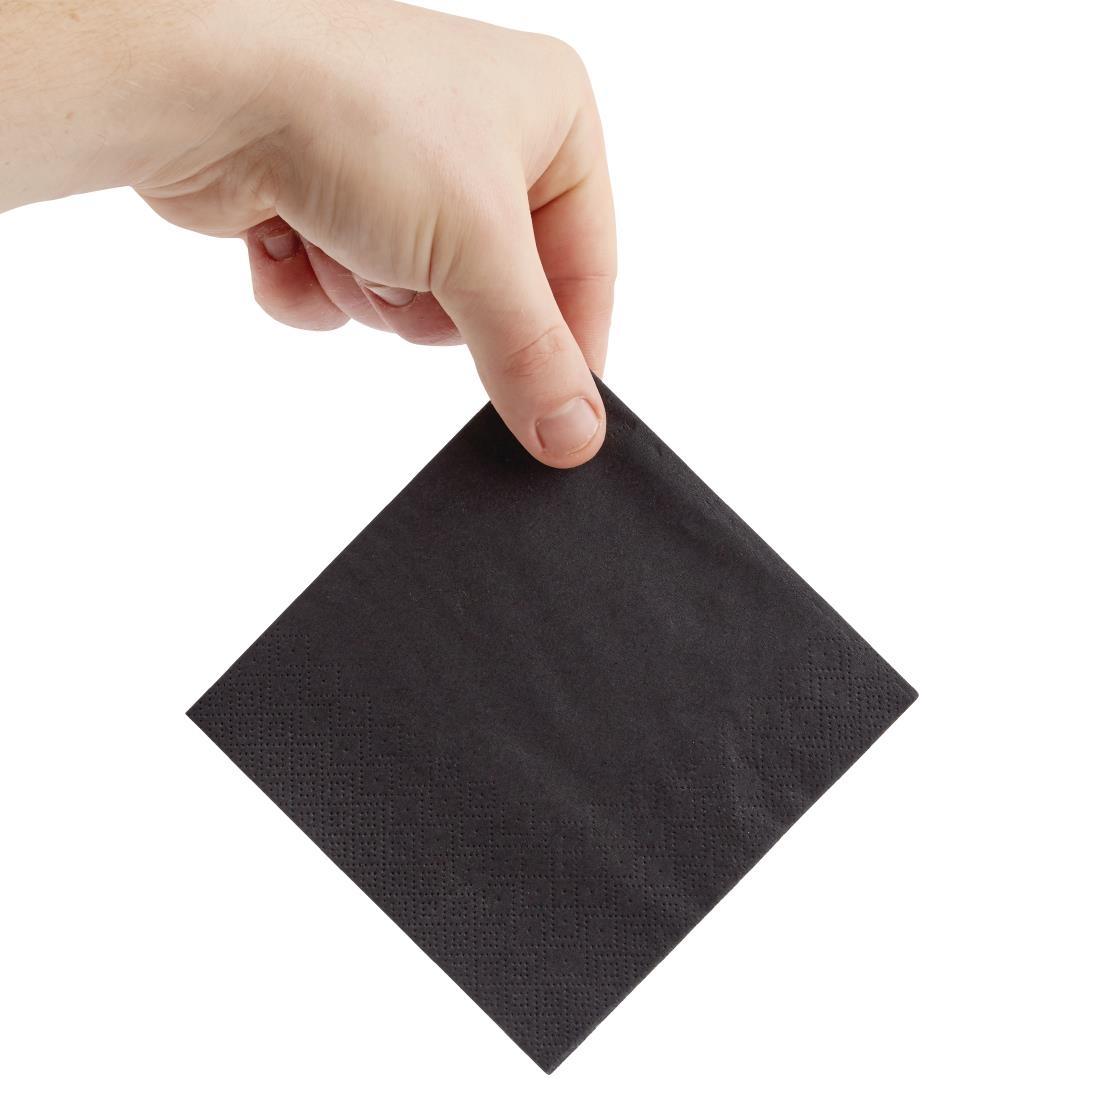 Fiesta Recyclable Cocktail Napkin Black 24x24cm 2ply 1/4 Fold (Pack of 4000) - FE218  - 3